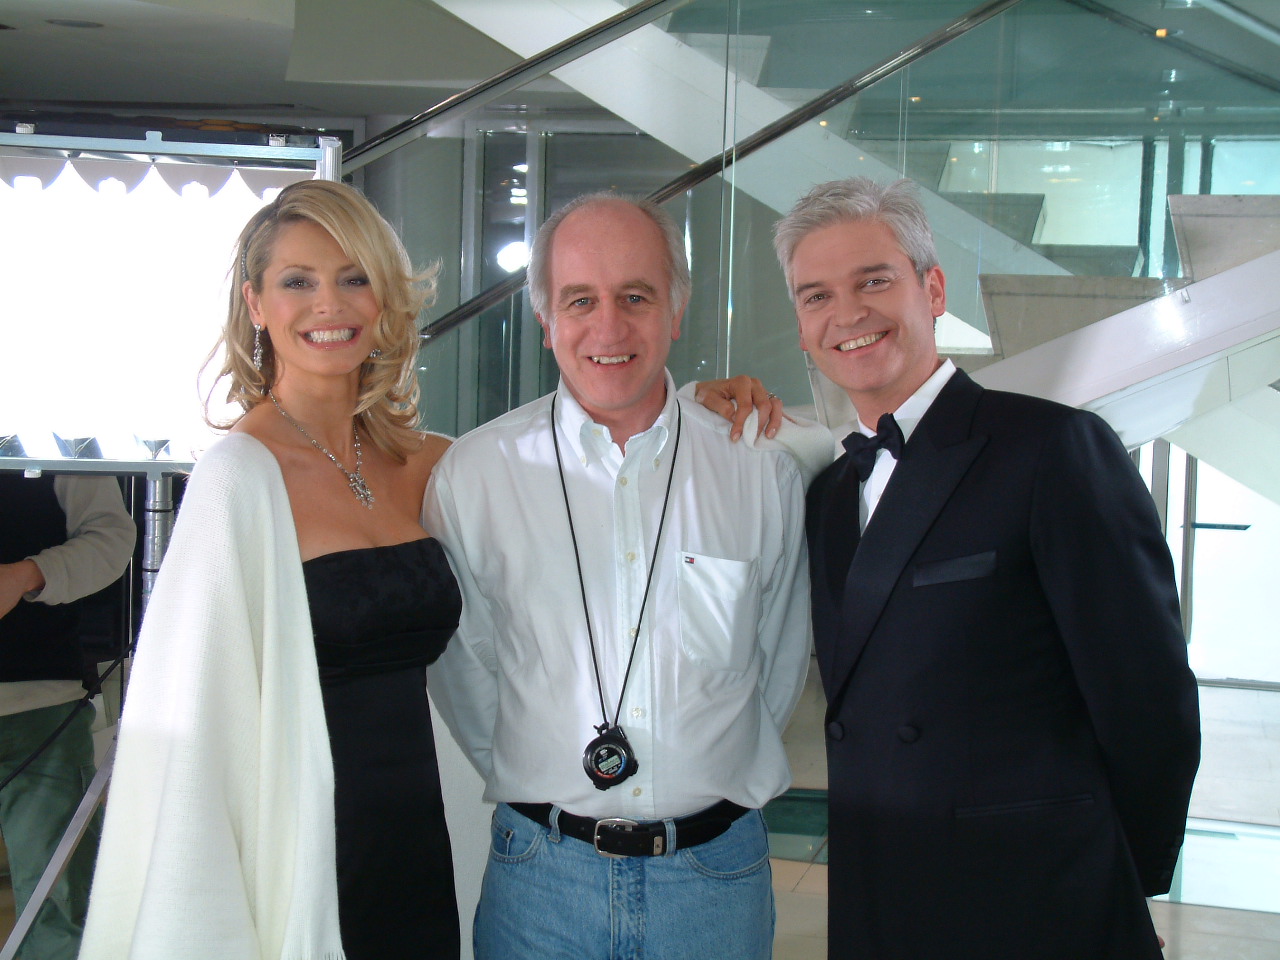 Me with TV Stars, Tess Daly & Philip Schofield. Directing them fir TV.